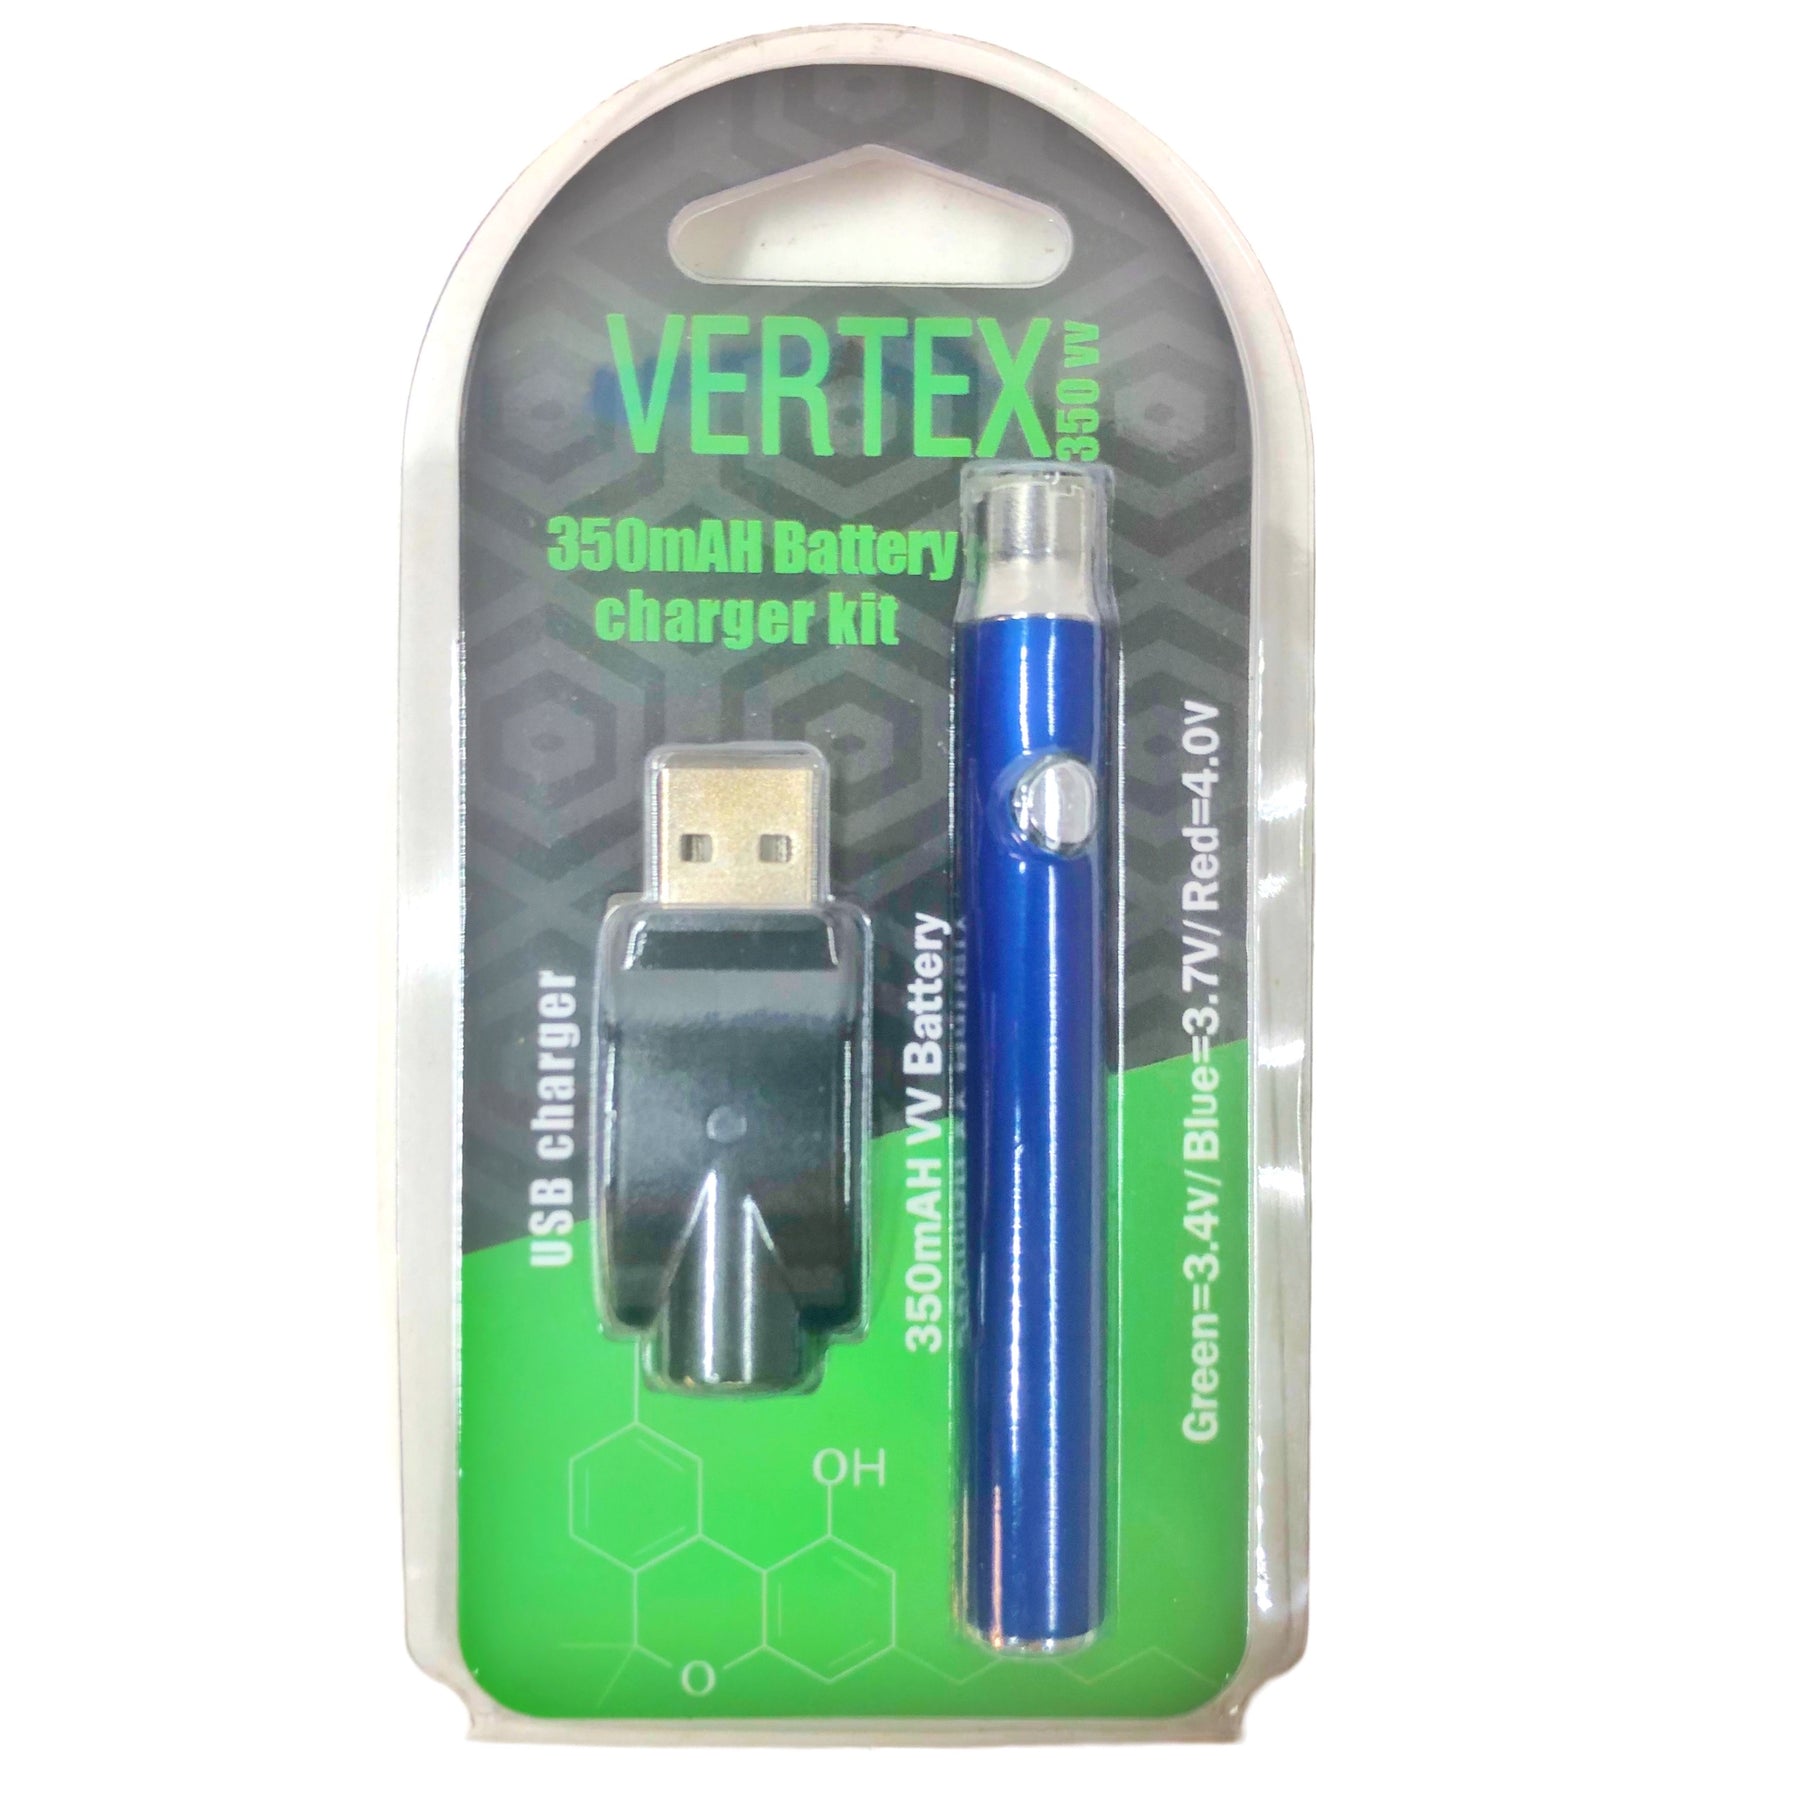 Vertex Battery For Weed